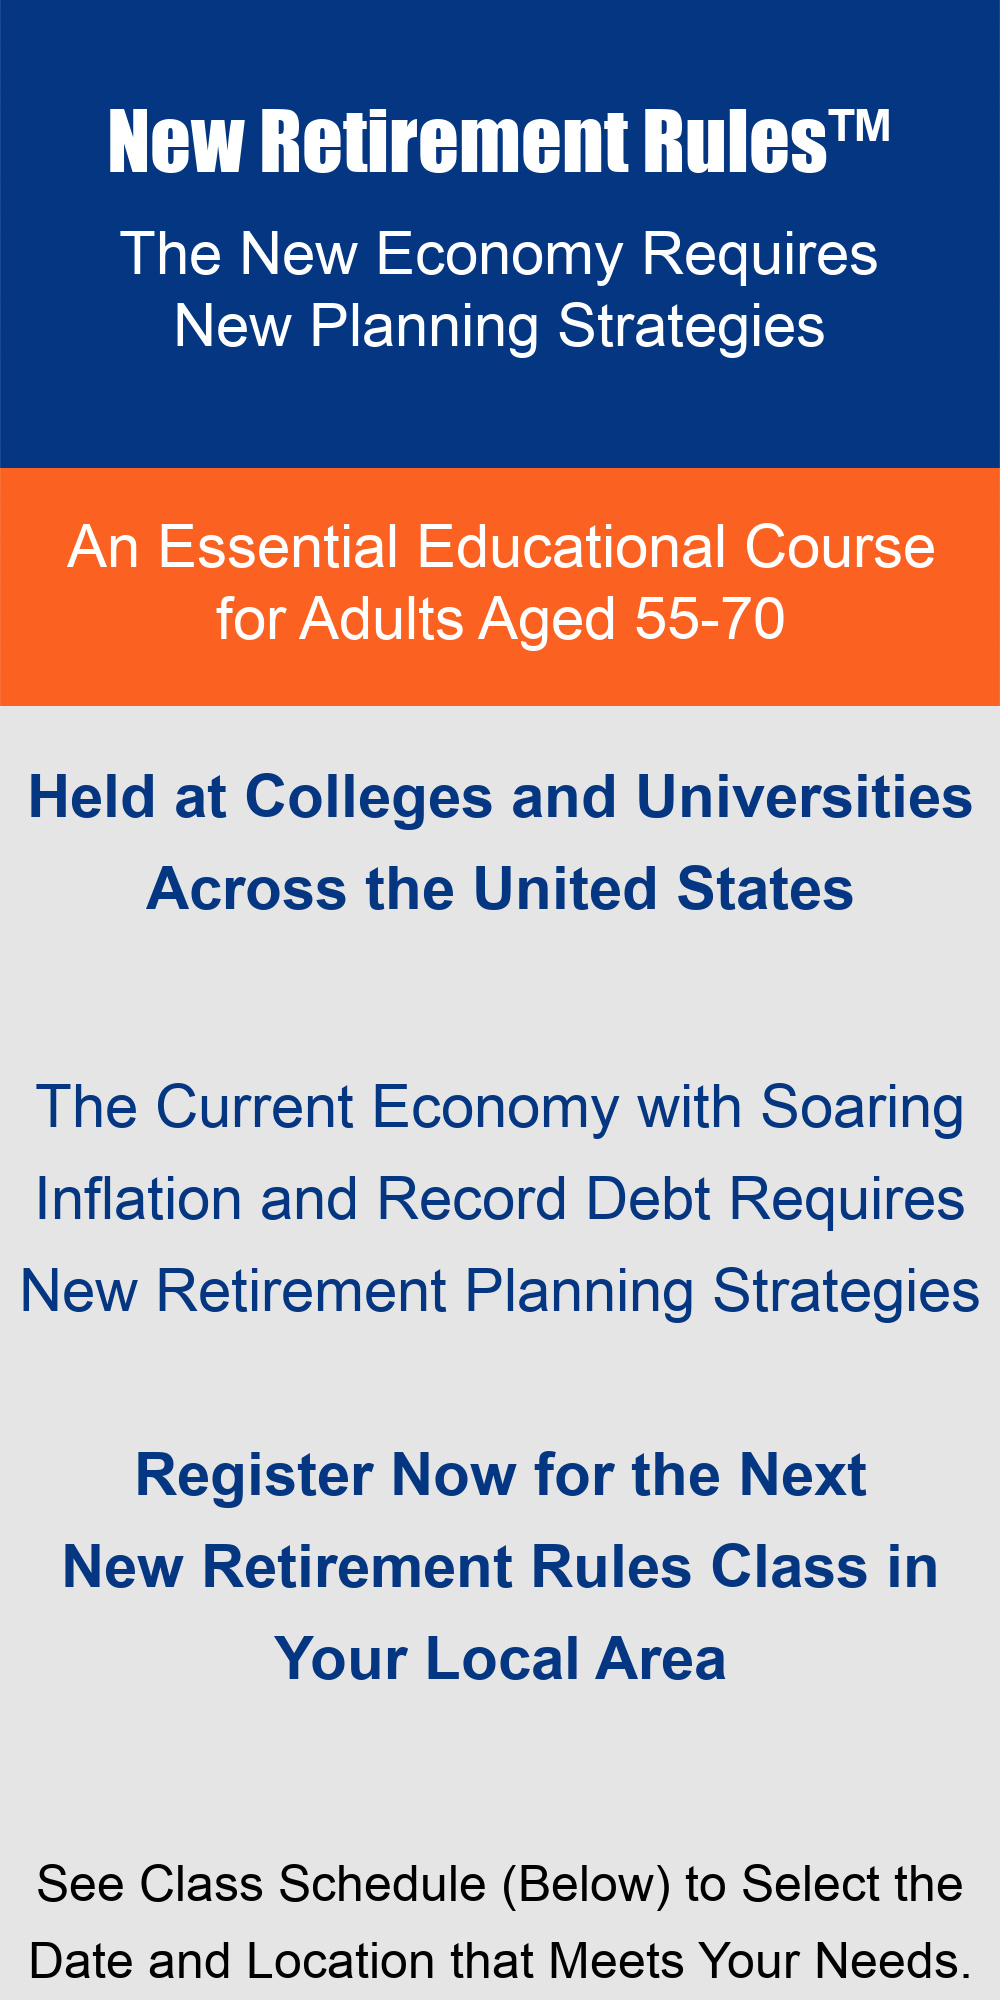 New Retirement Rules - An Essential Educational Course of Adults 55-70